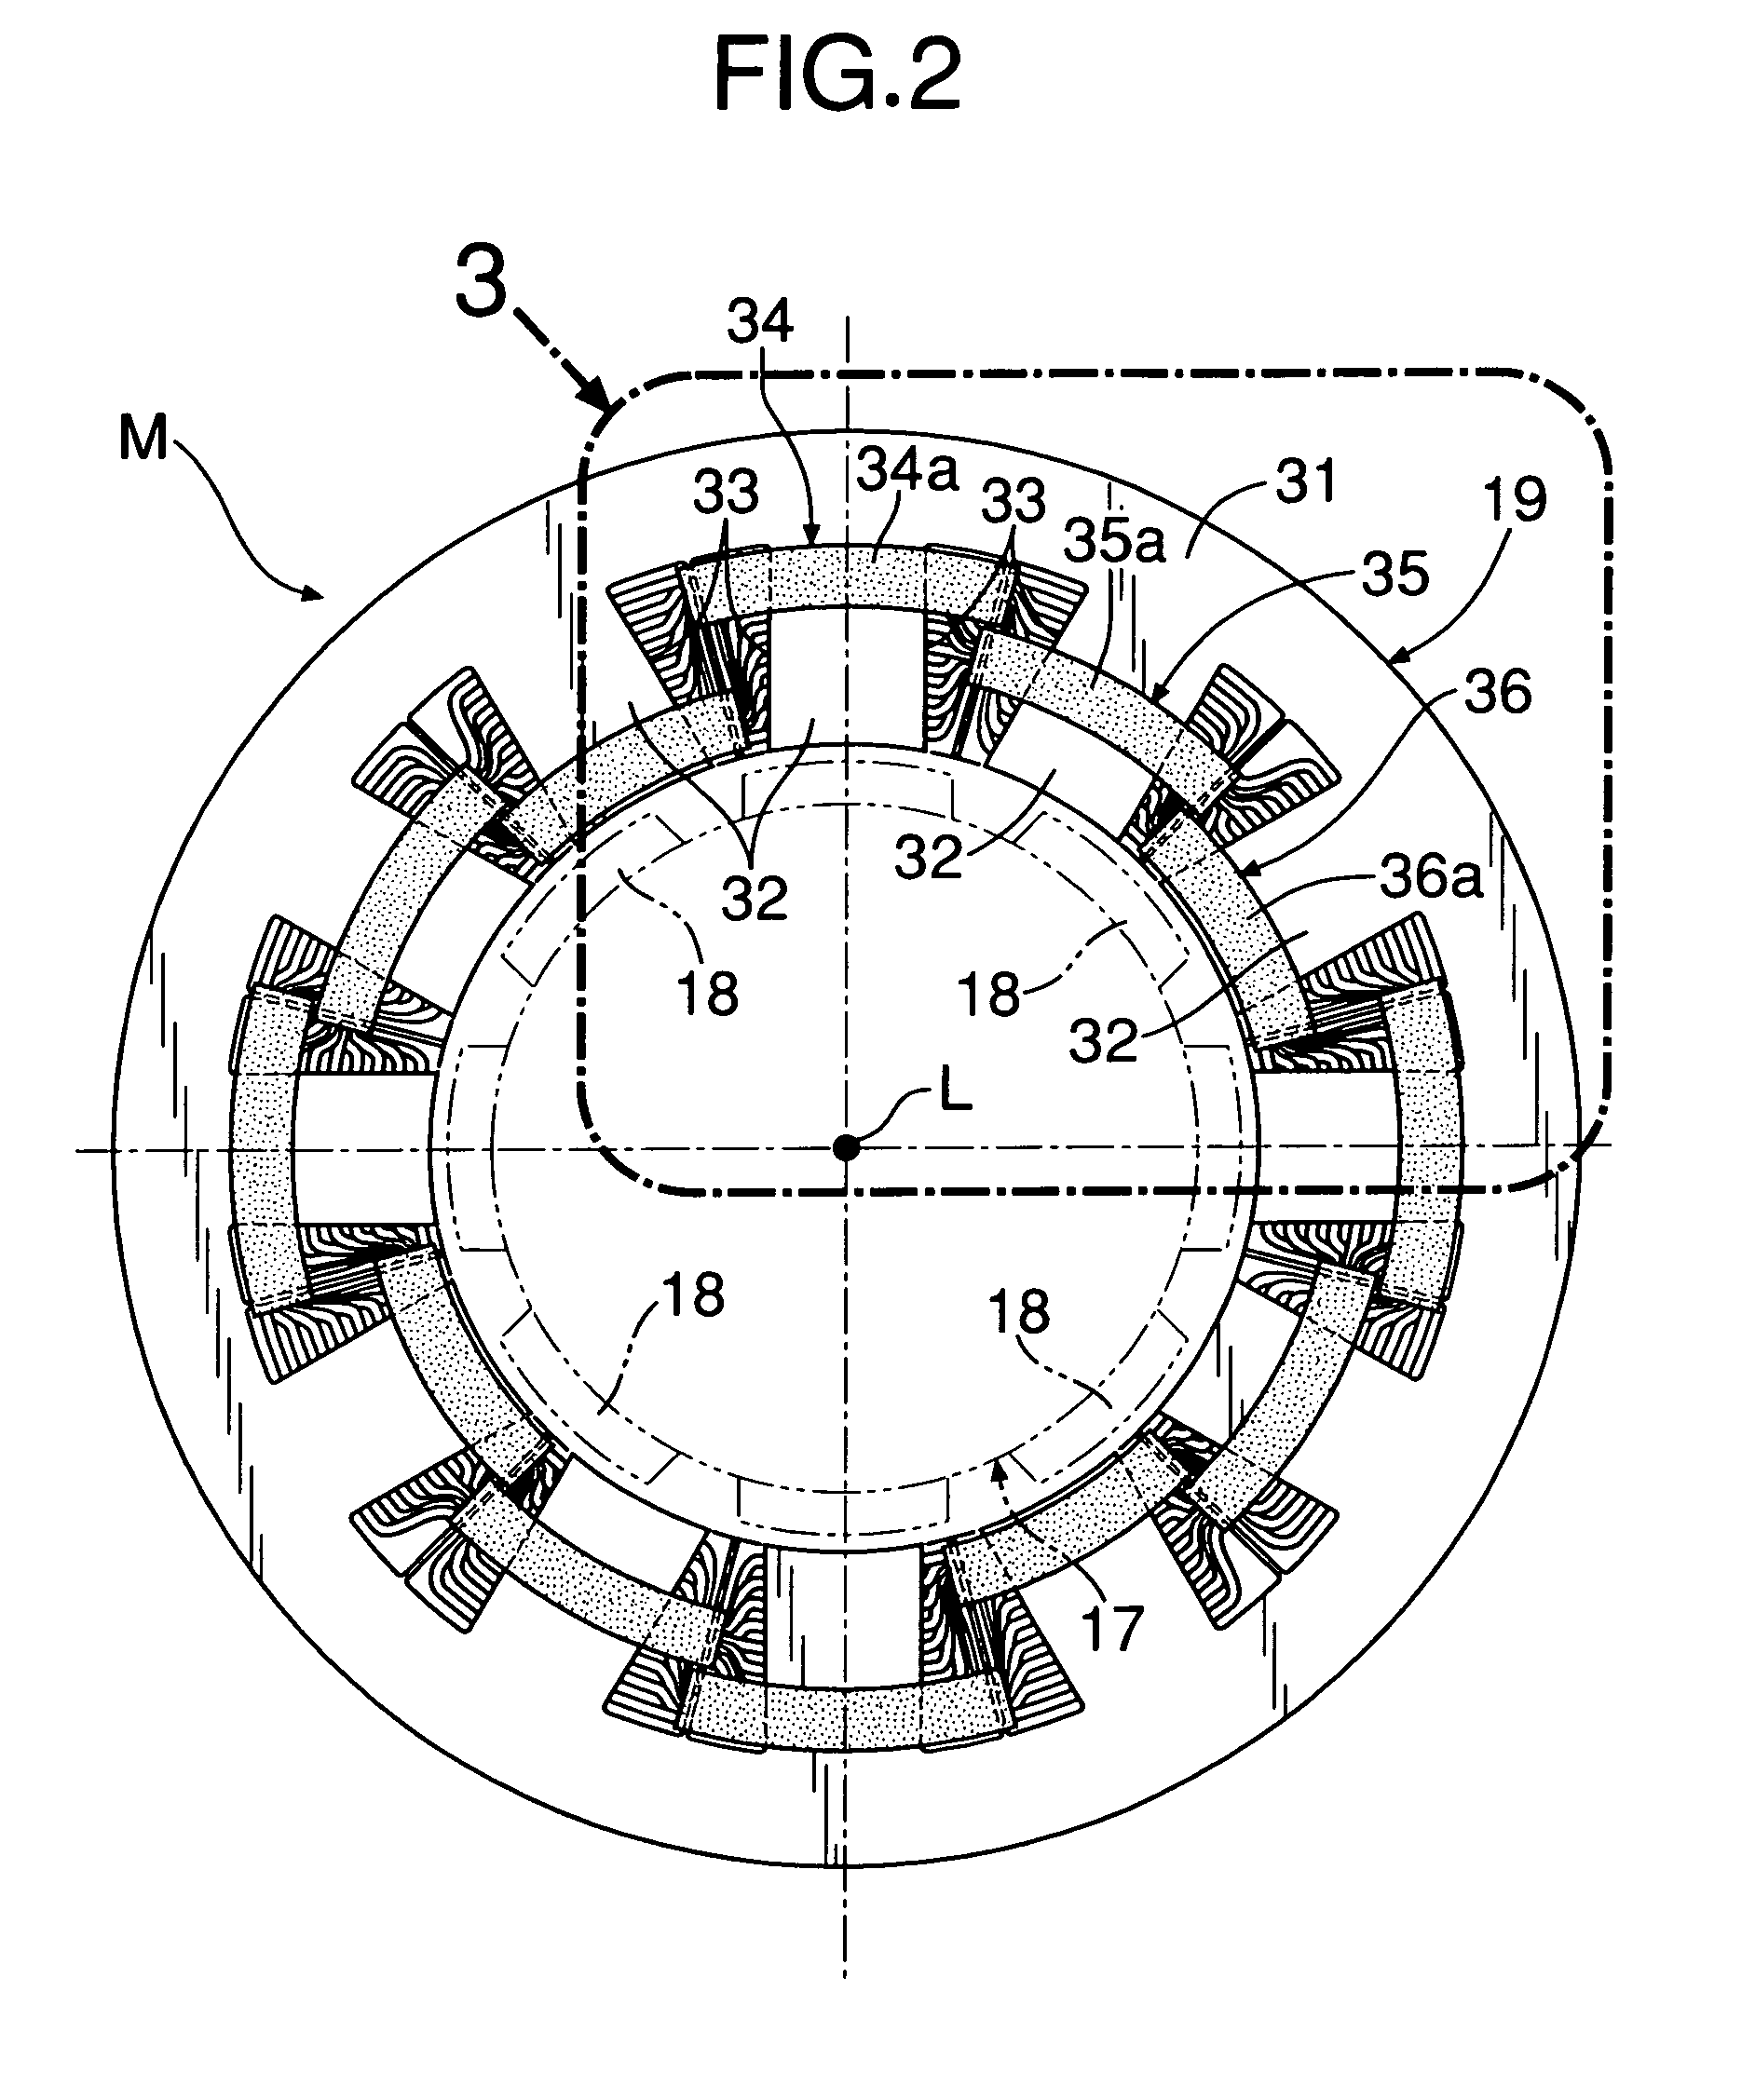 Motor stator core with skewed slots and production process therefor